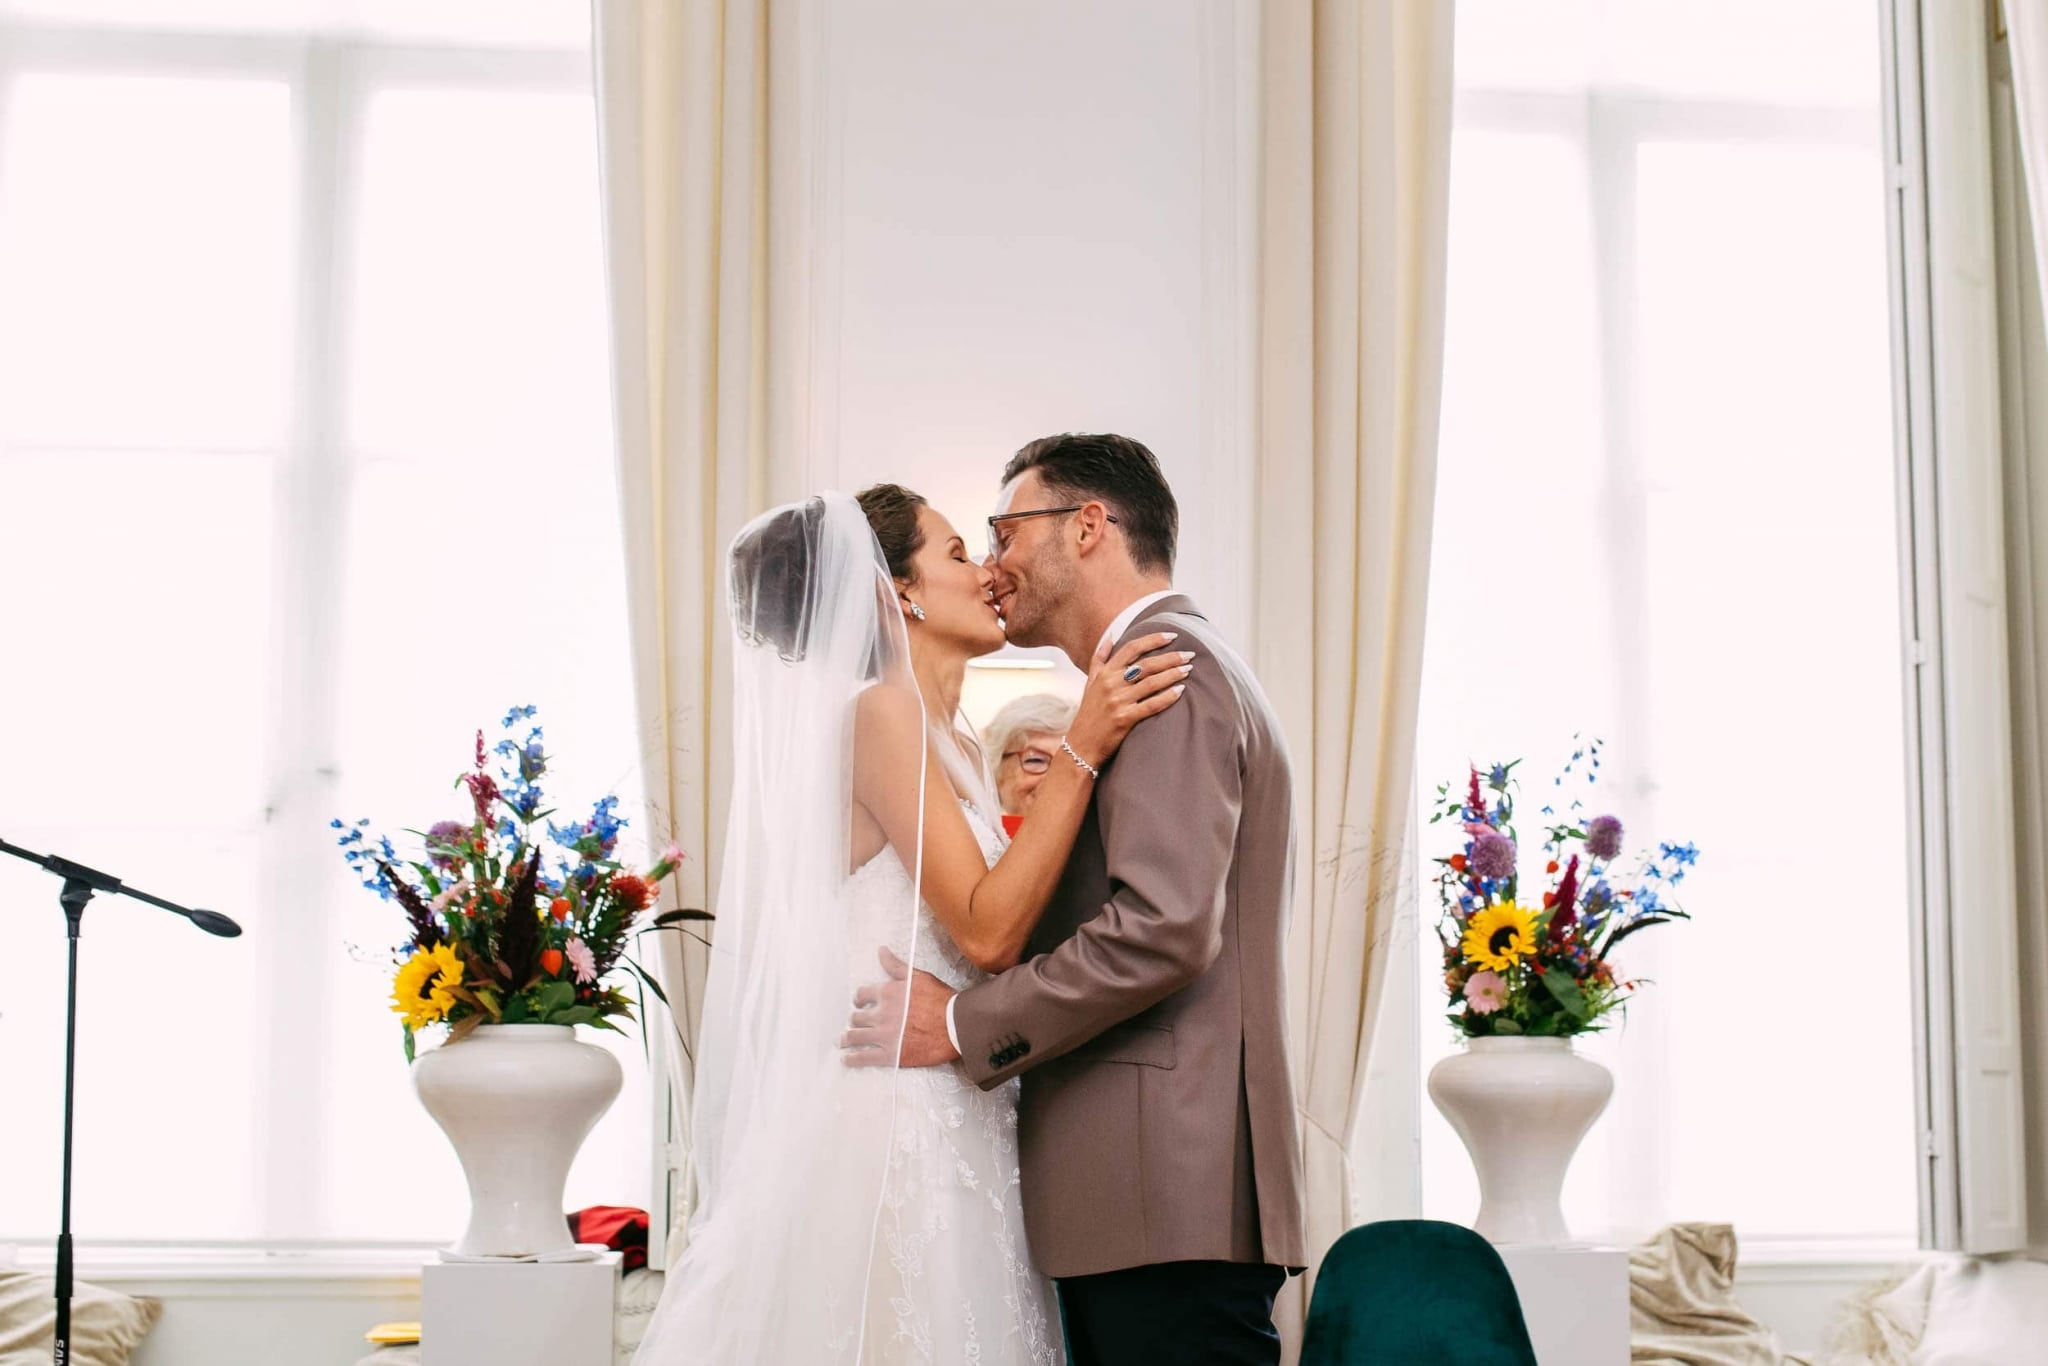 A bride and groom kiss in front of large windows.